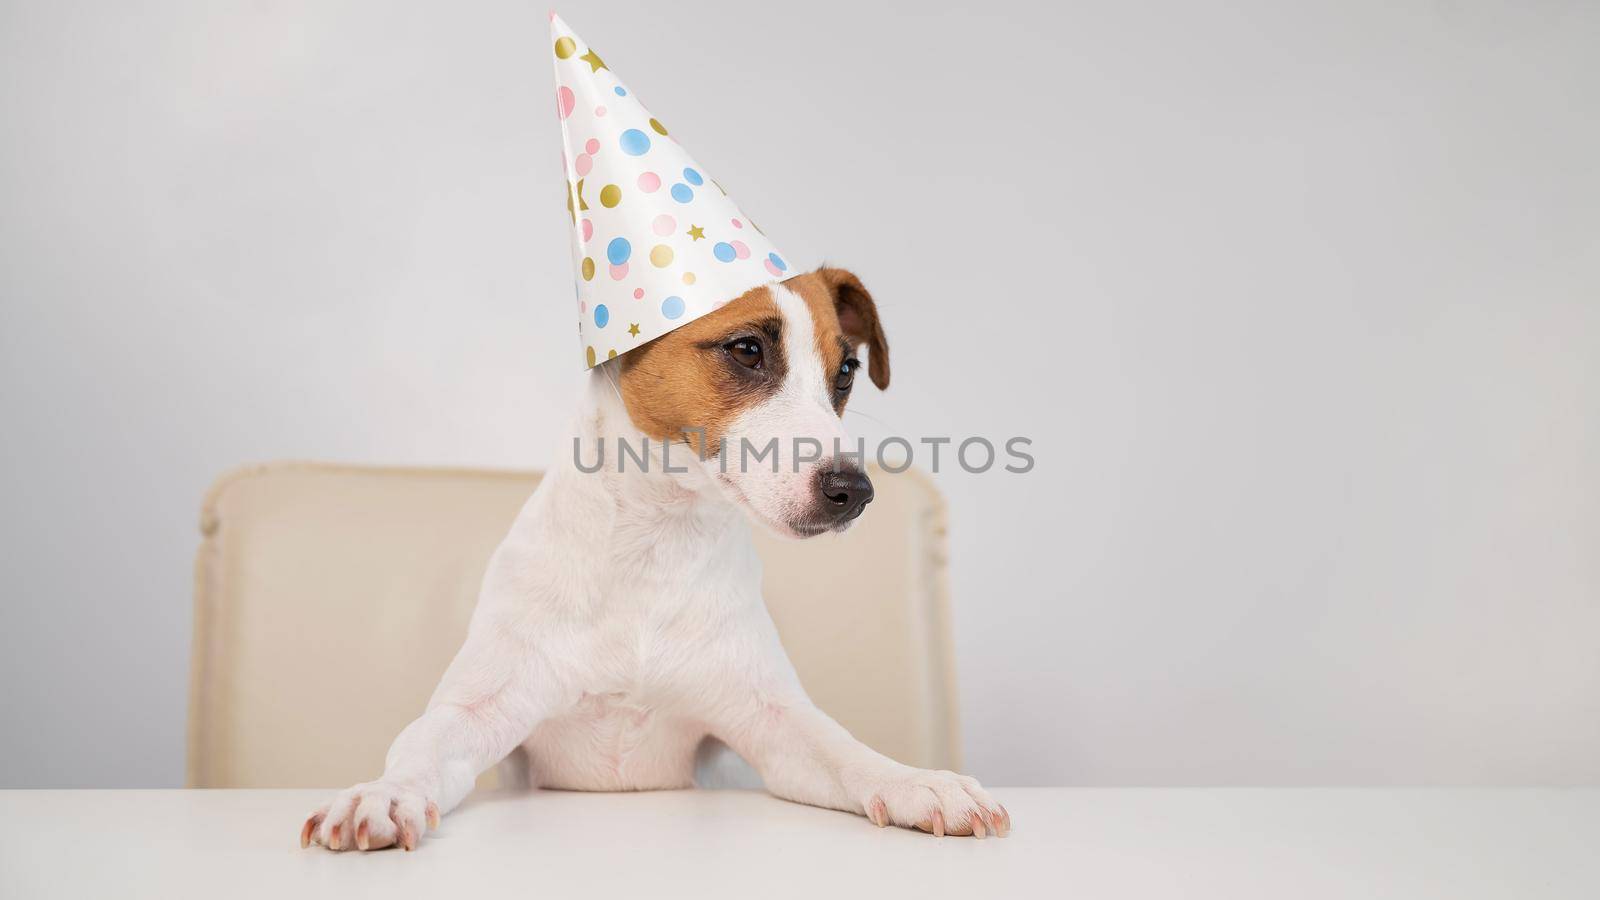 Dog in a birthday hat on a white background. Jack russell terrier is celebrating an anniversary.